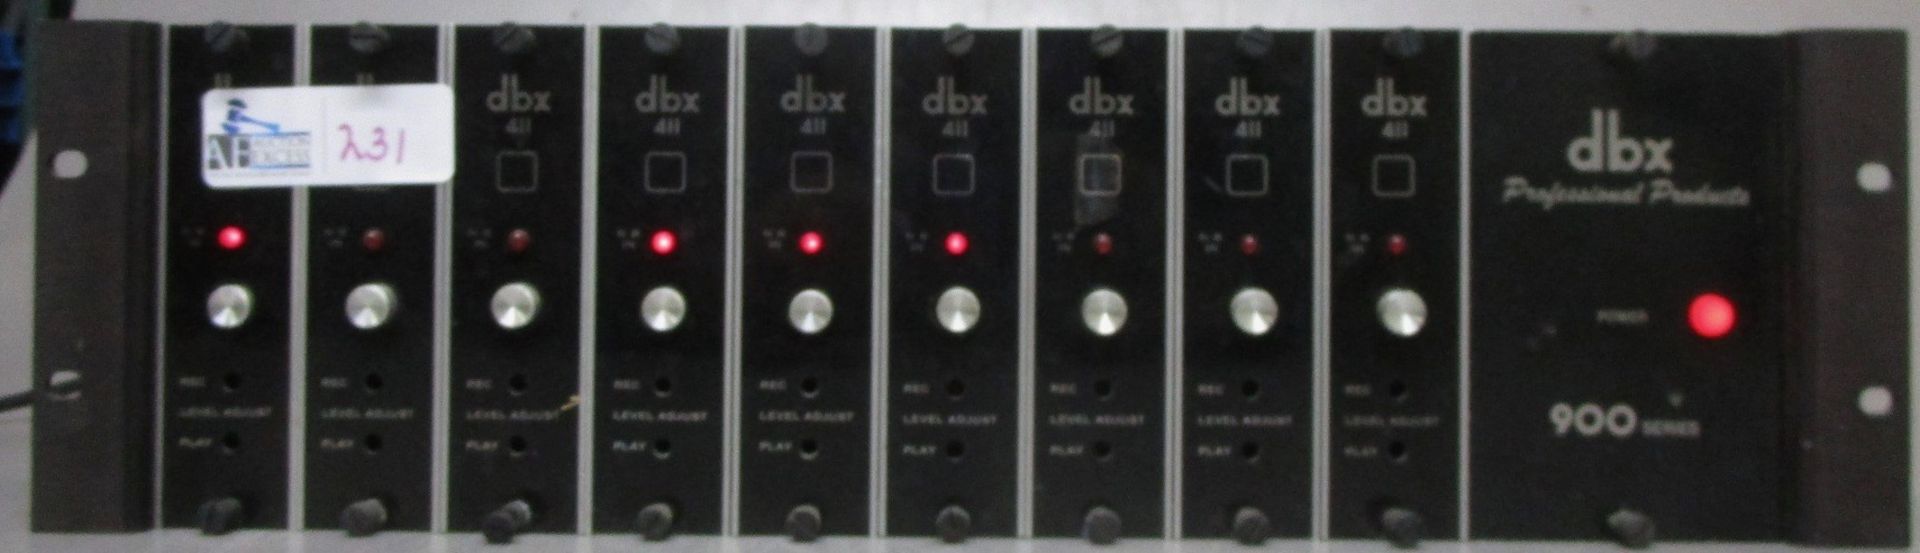 DBX 900 SERIES WITH 411 CARDS